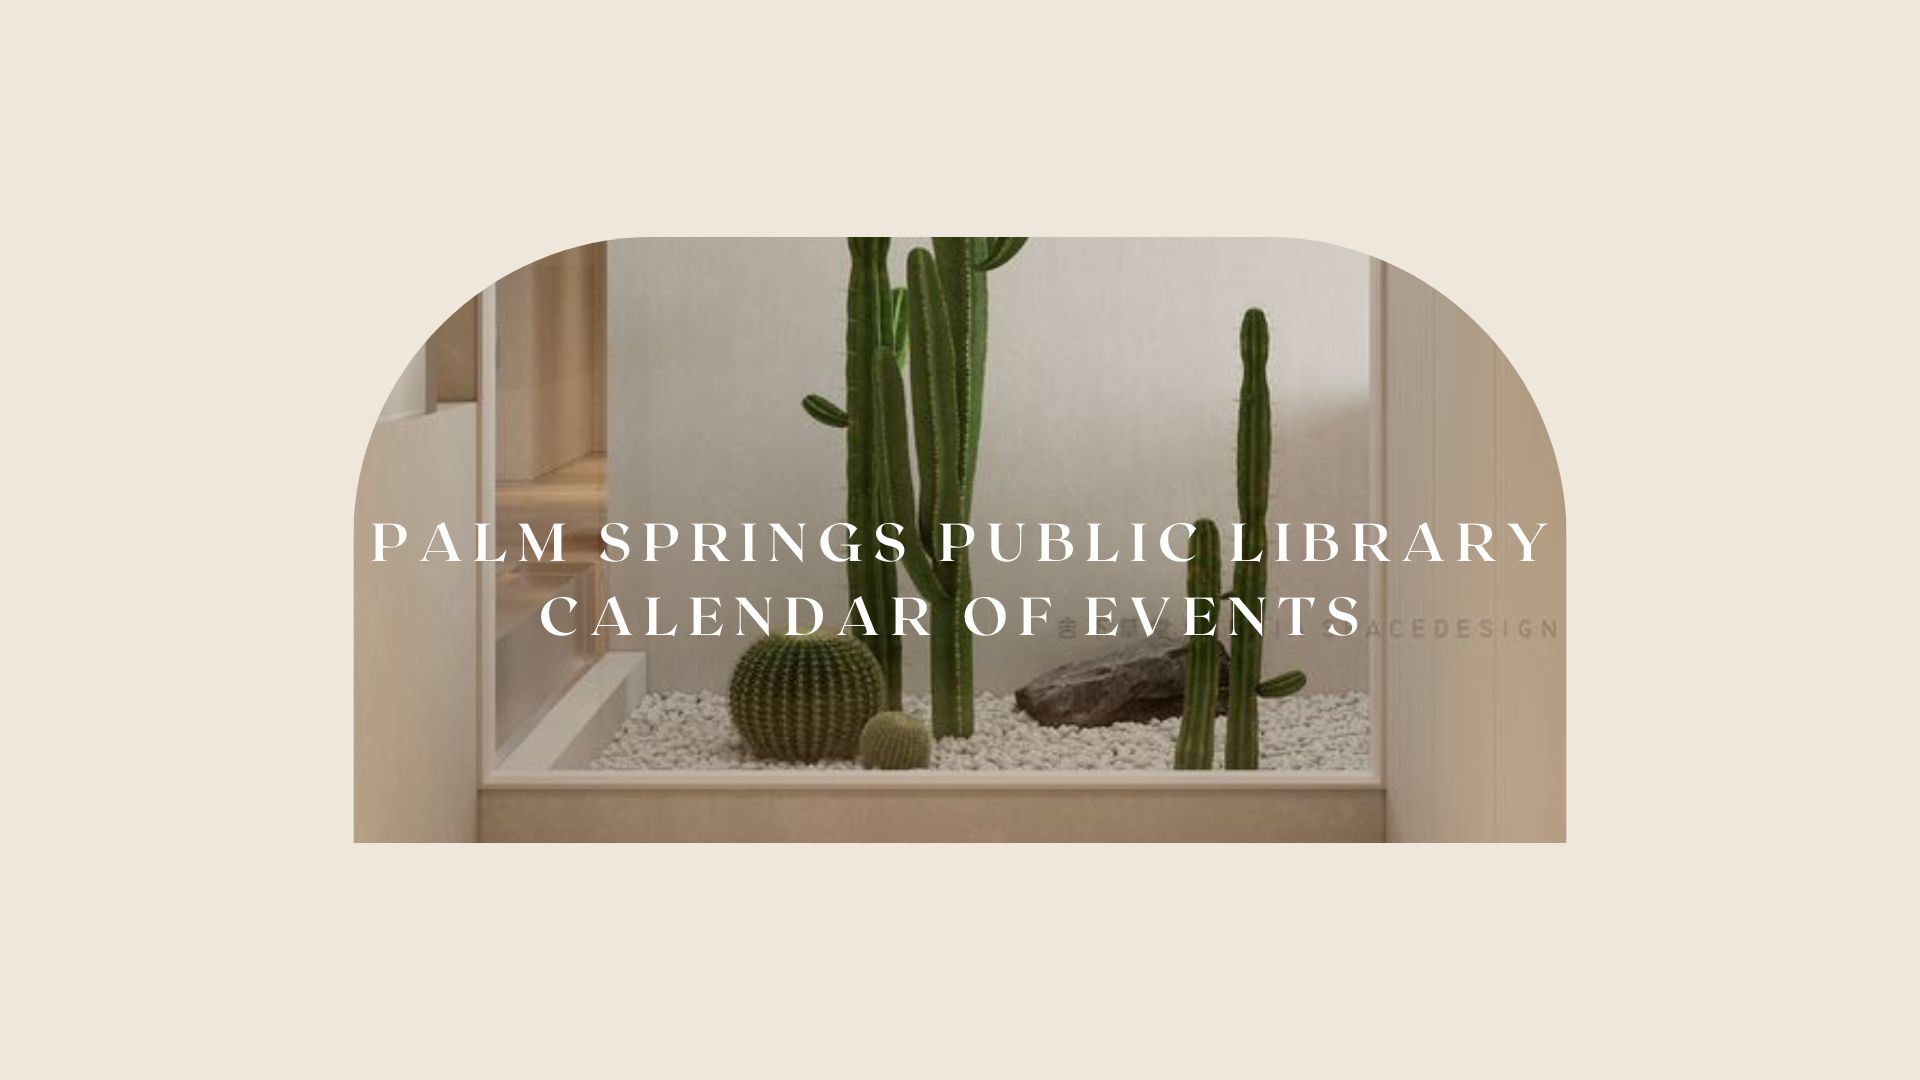 Palm springs public library calendar of events.  